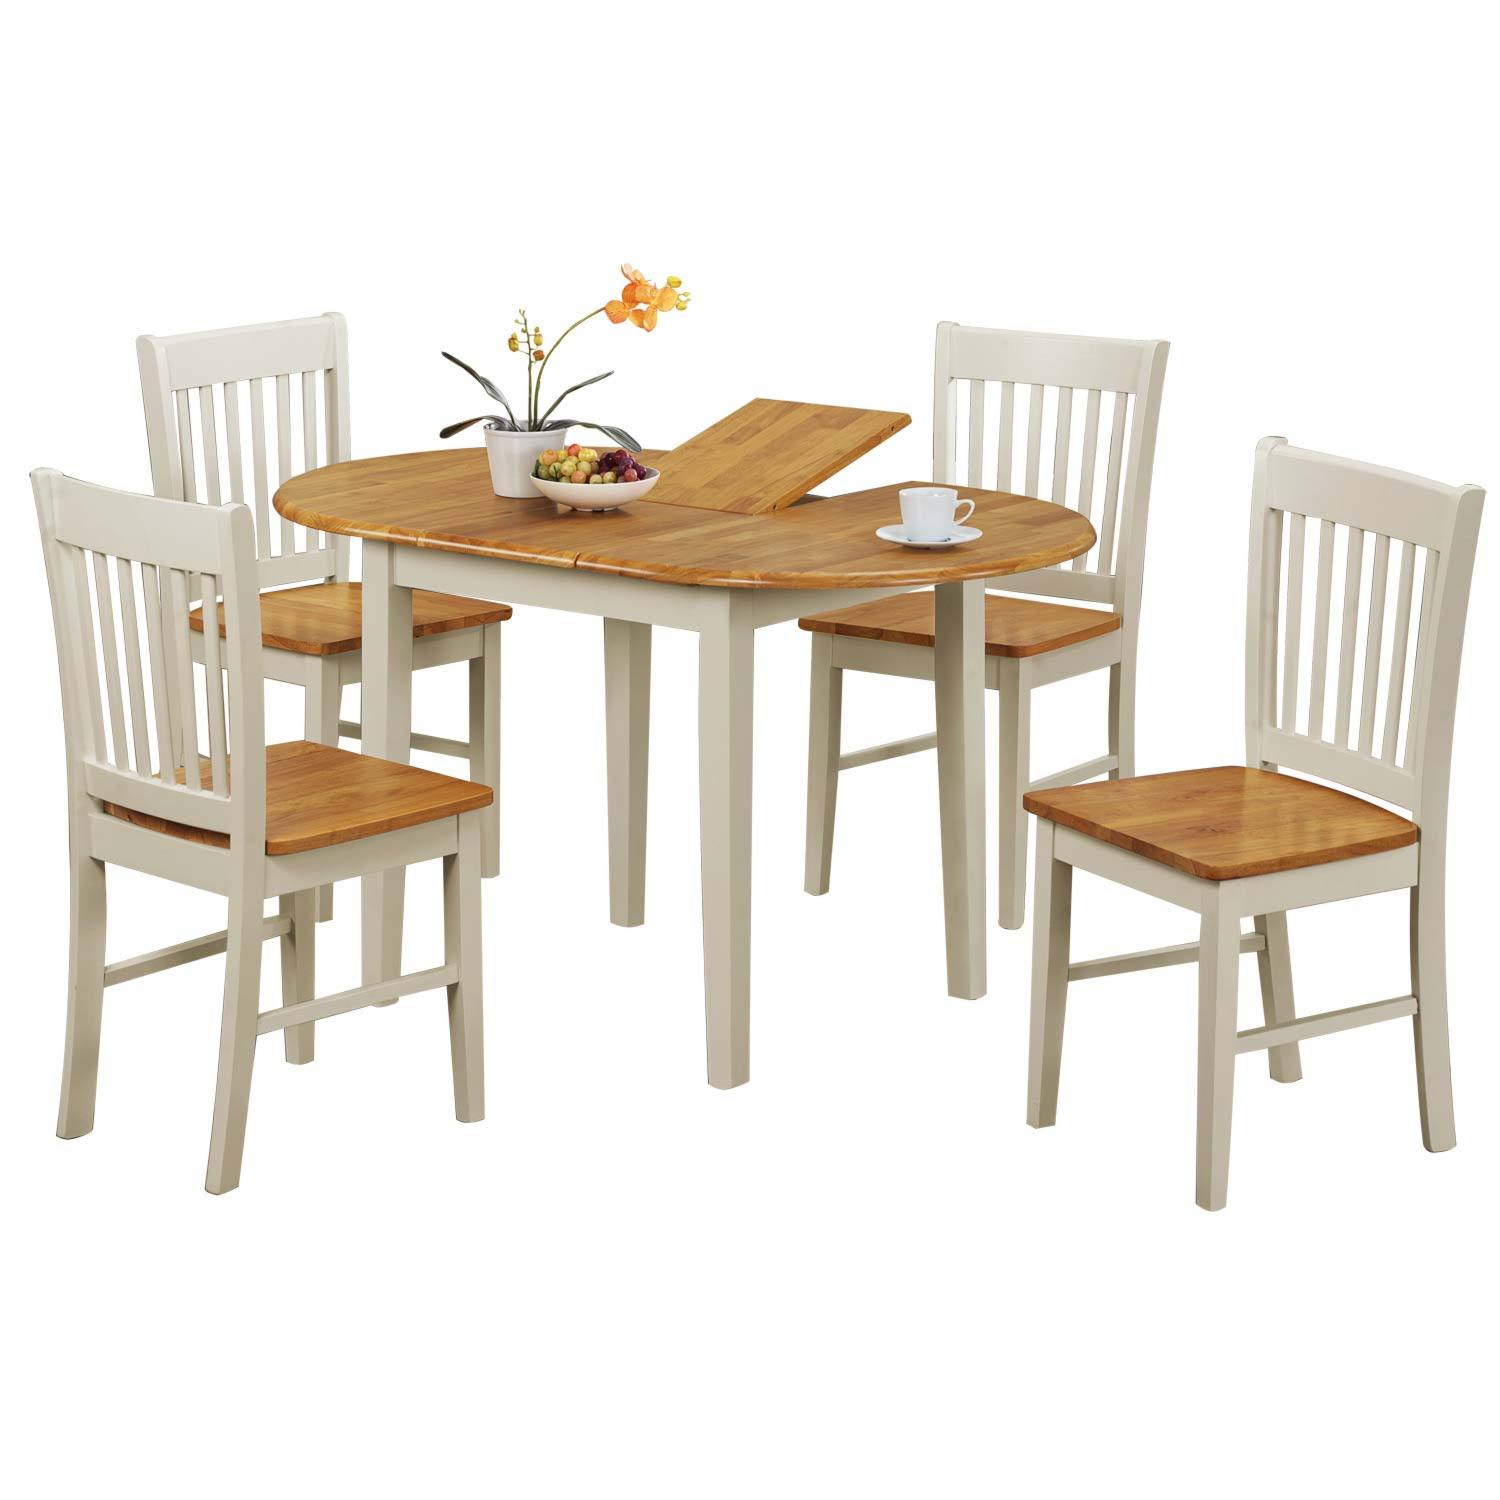 Kentucky Extending Dining Table And Four Chairs Set throughout sizing 1500 X 1500